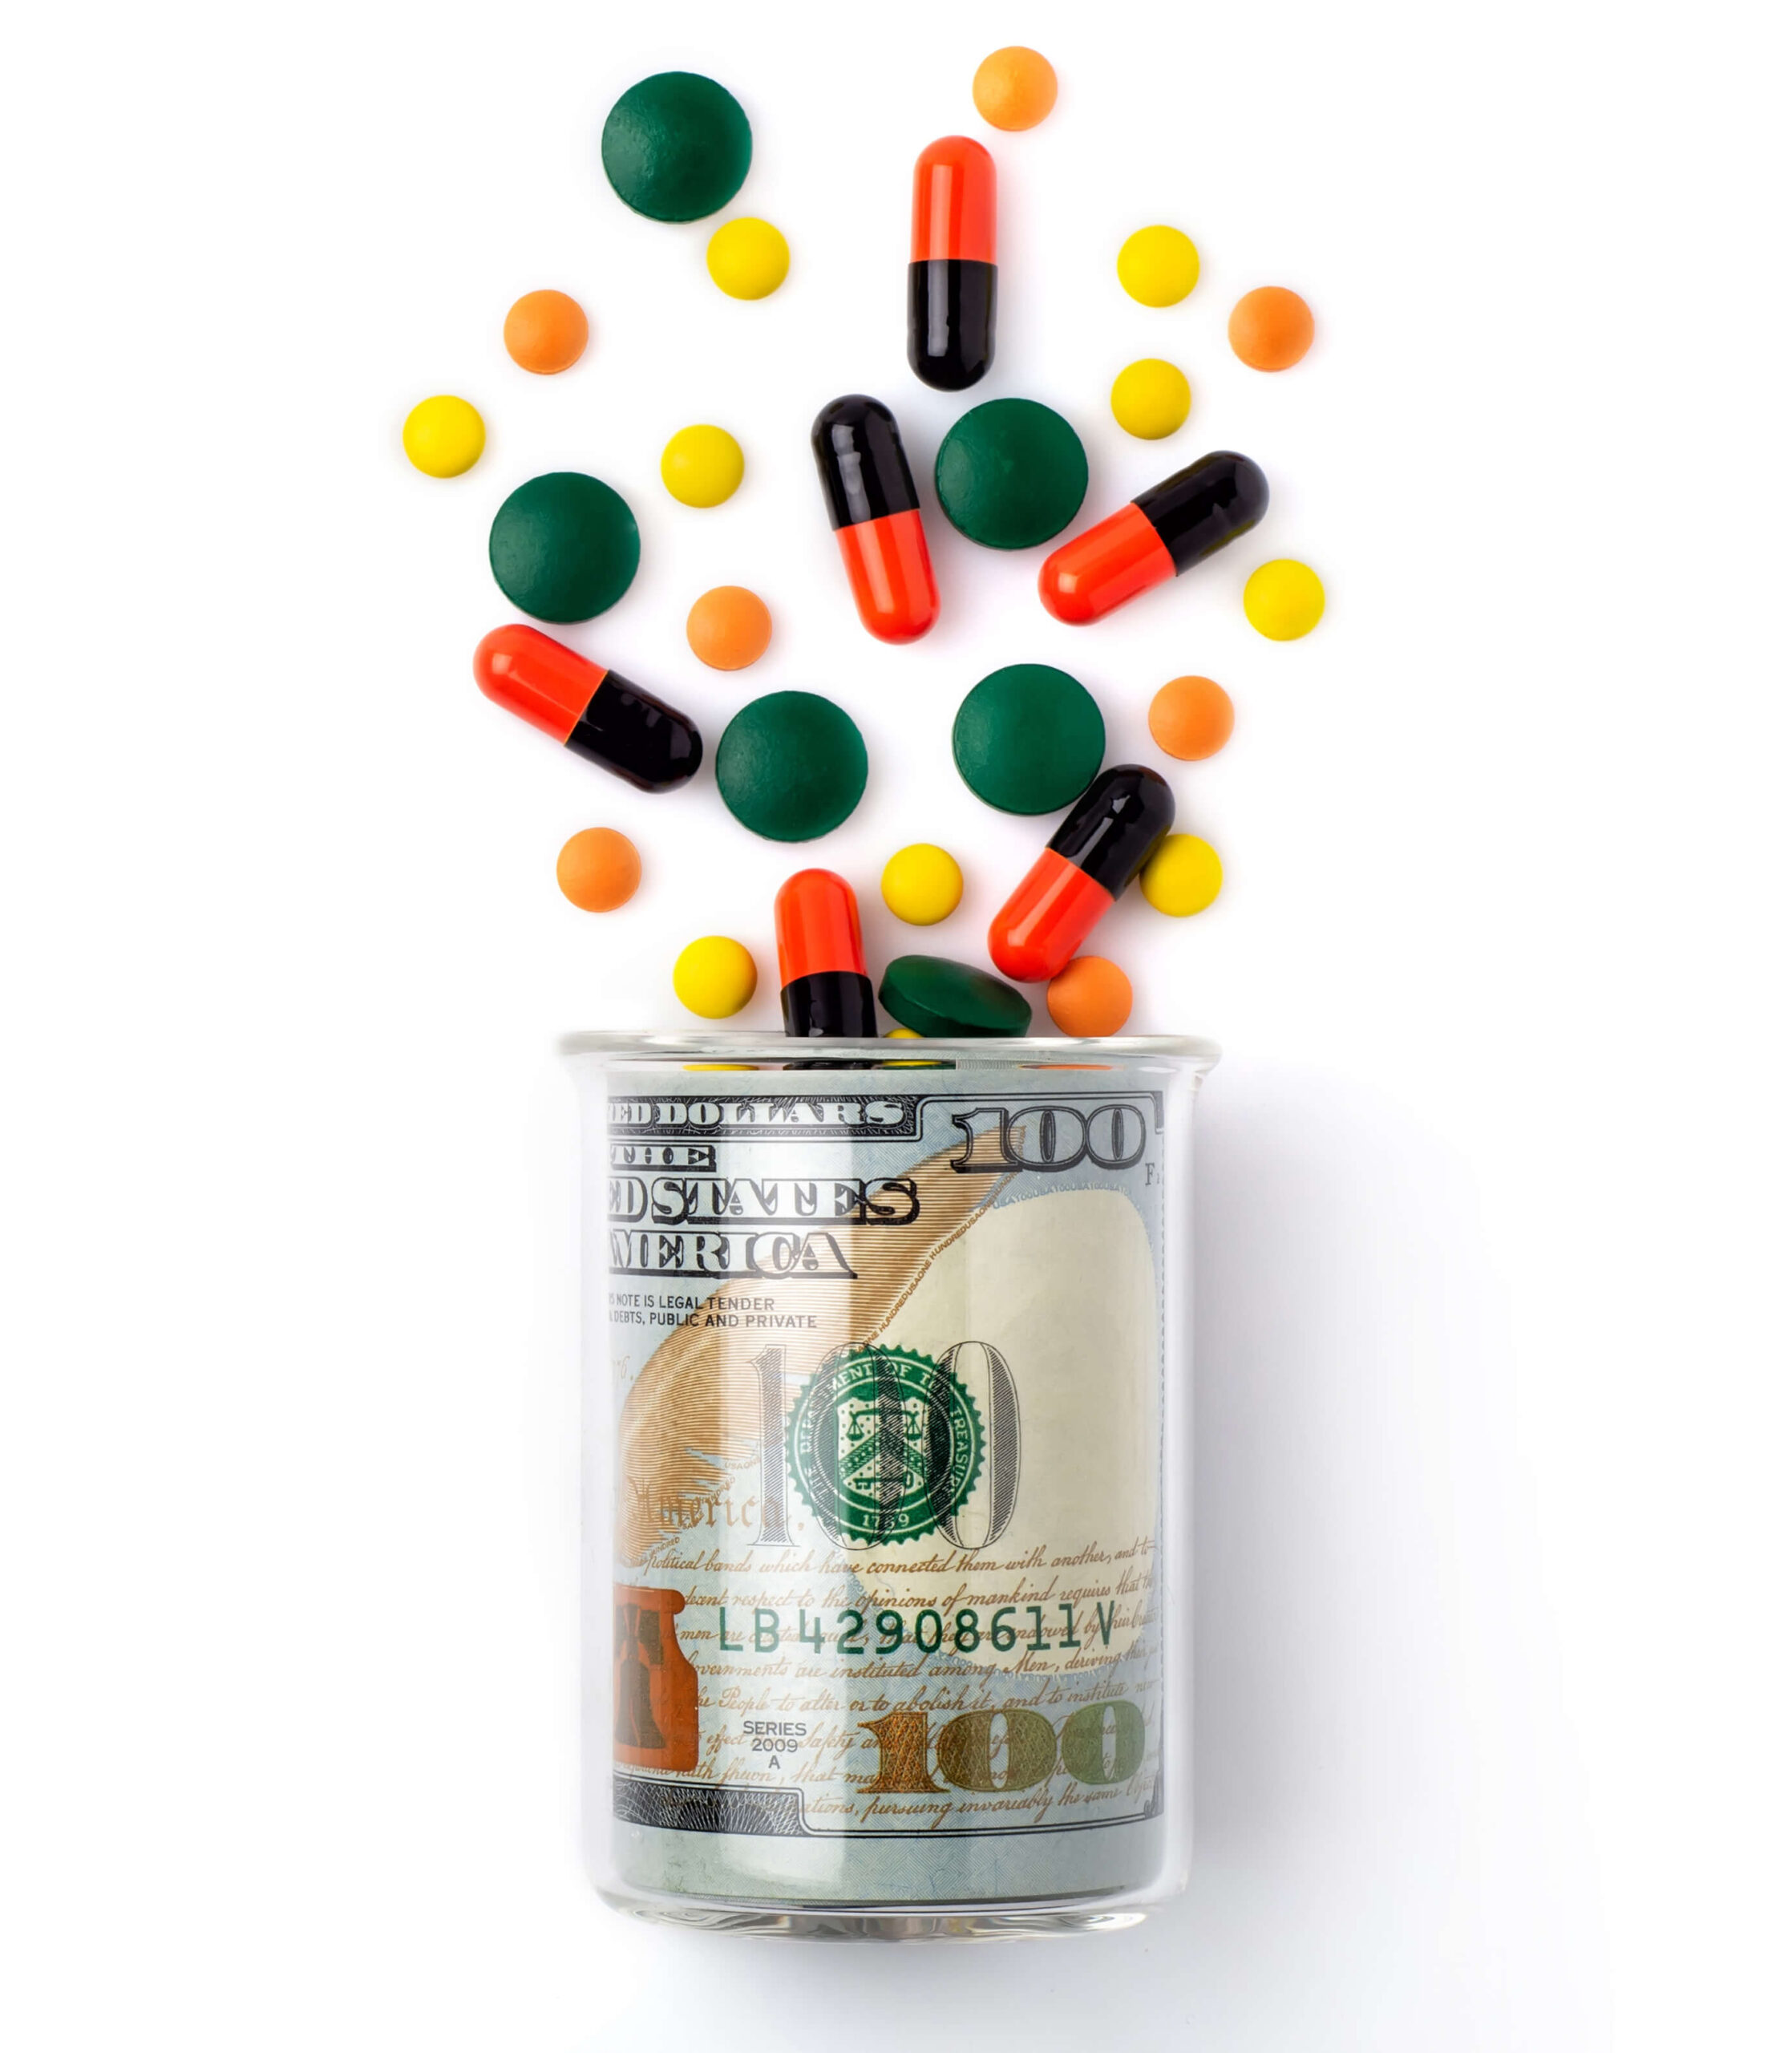 money, health, isolated, medical, medicine, banknote, cost, dollar, expensive, medication, pharmaceutical, tablet, vitamin, white, drug, price, pill, prescription, addiction, american, background, bill, business, cash, colorful, cure, financial, healthcare, healthy, package, painkiller, pharmacy, remedy, treatment, pink, antibiotic, bottle, color, colour, full, many, multicoloured, packaging, profit, relief, scatter, spill, variation, yellow